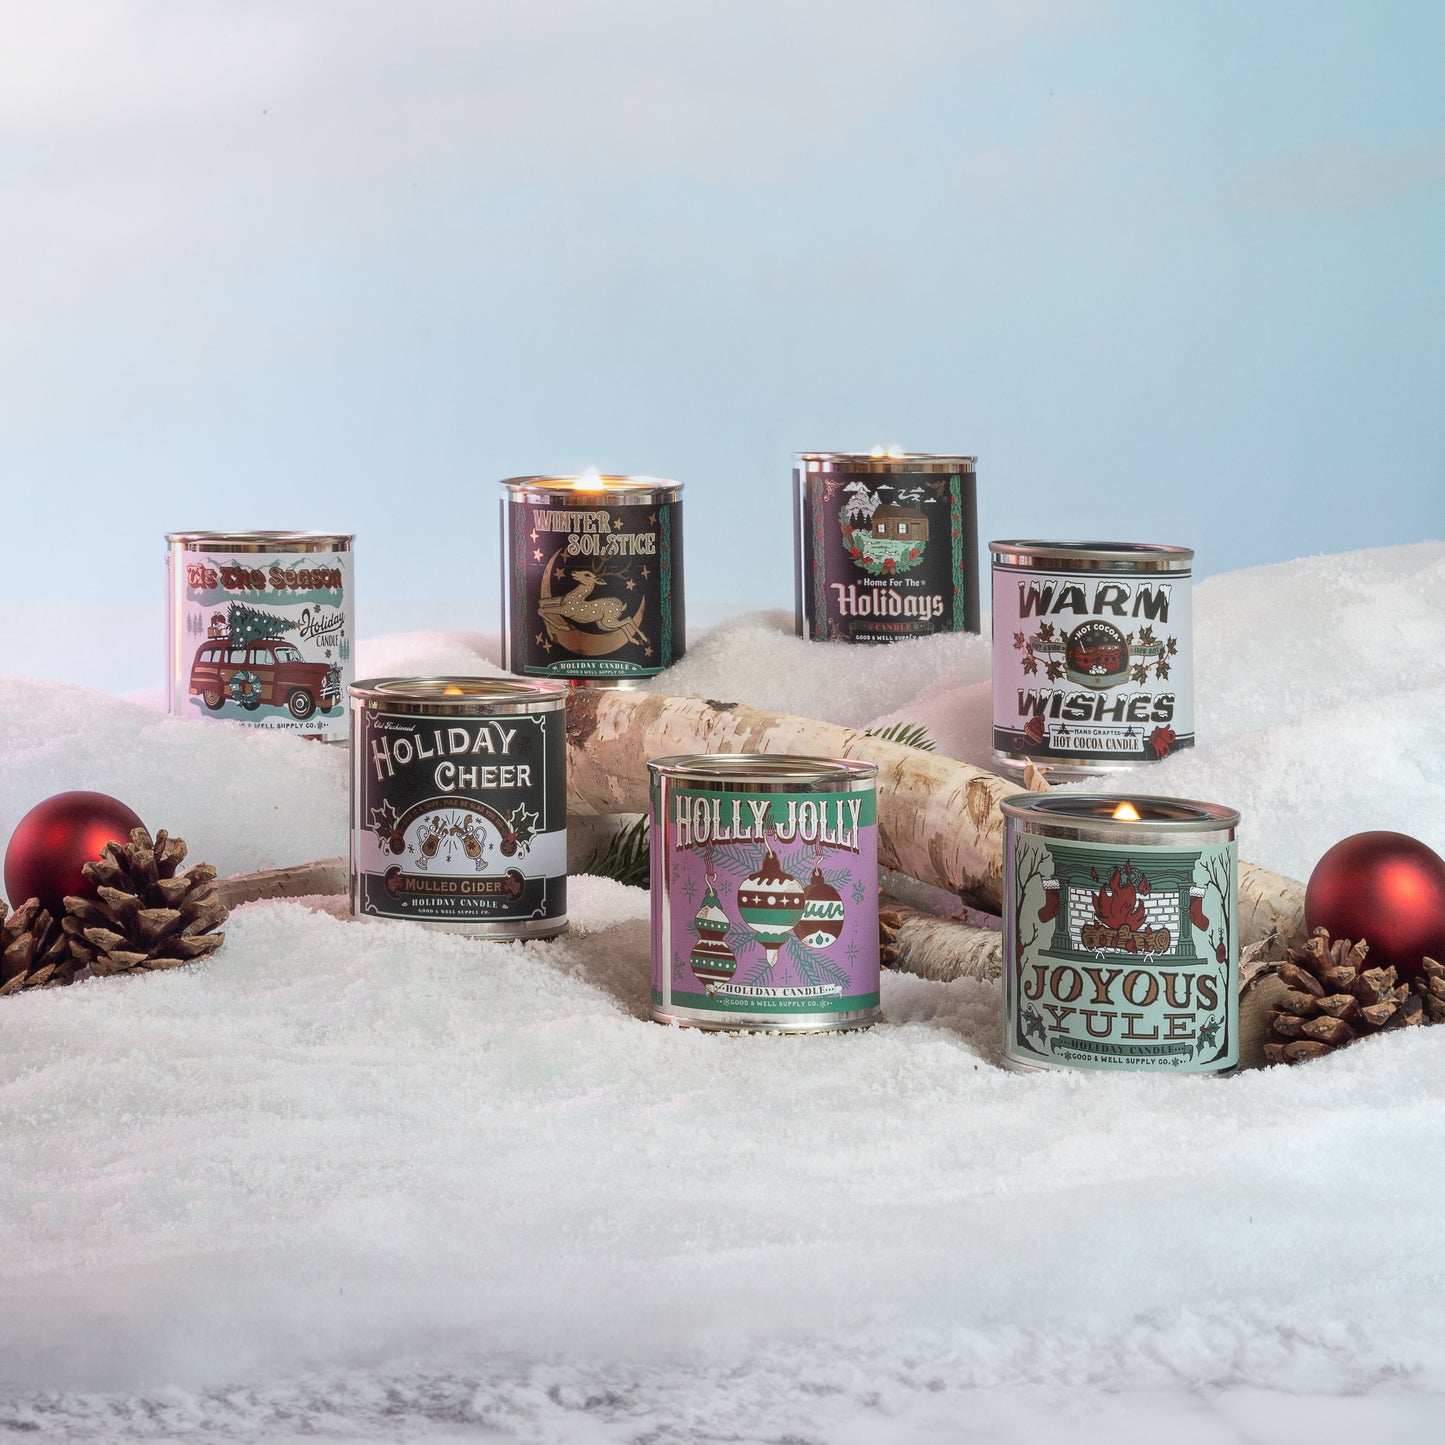 Holly Jolly Holiday Candle